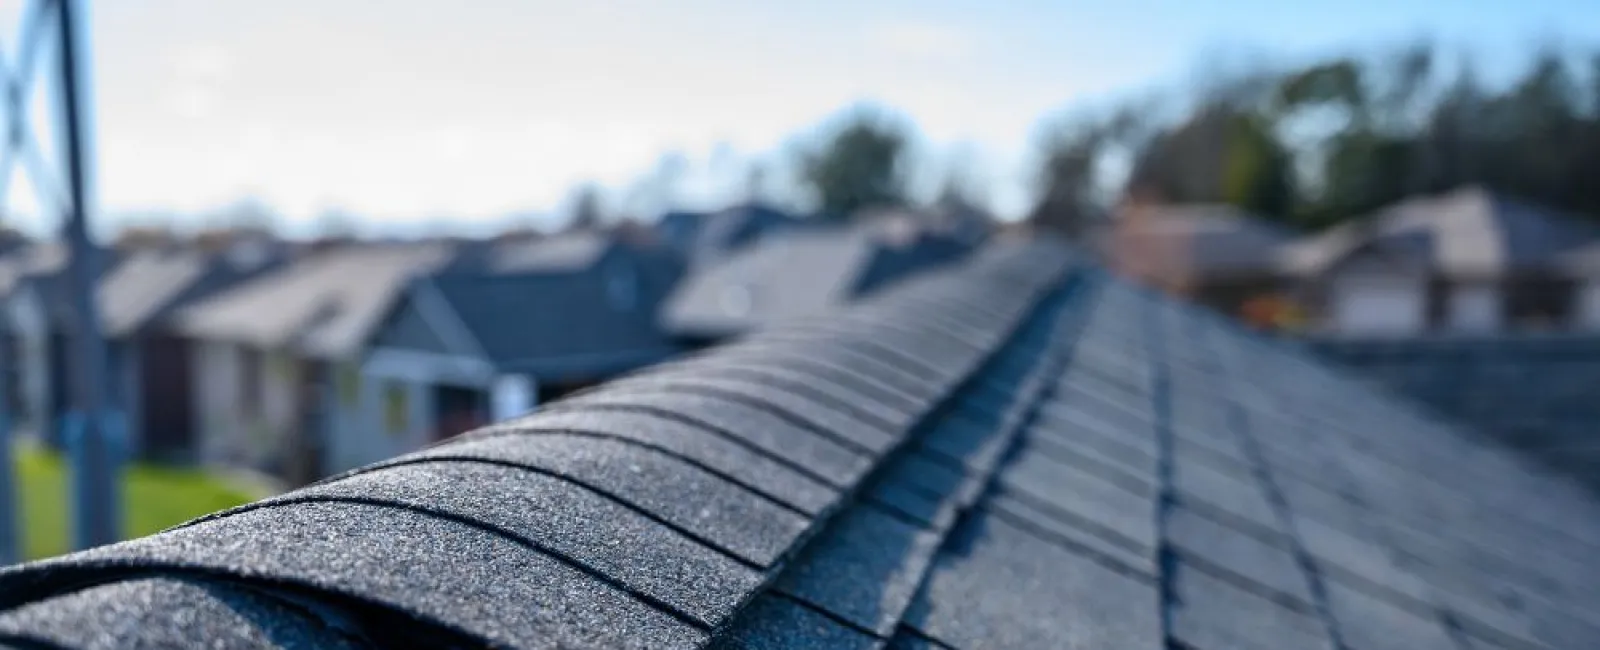 7 Signs You Need A New Roof for Your Home